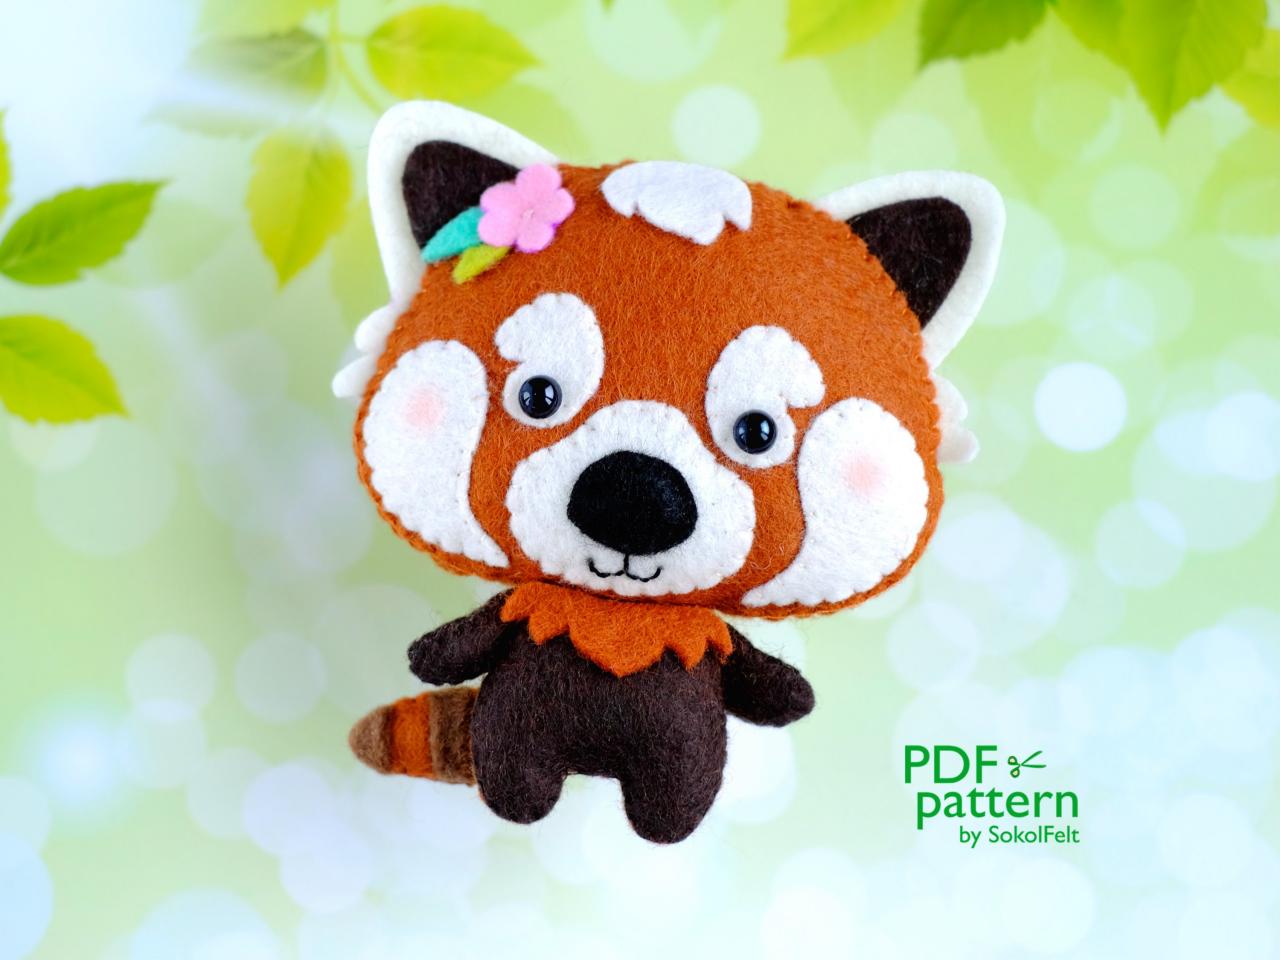 Red Panda Felt Toy Pdf And Svg Pattern, 2 Patterns In 1, Felt Woodland Animal Plush Toy Sewing Tutorial, Baby Crib Mobile Toy